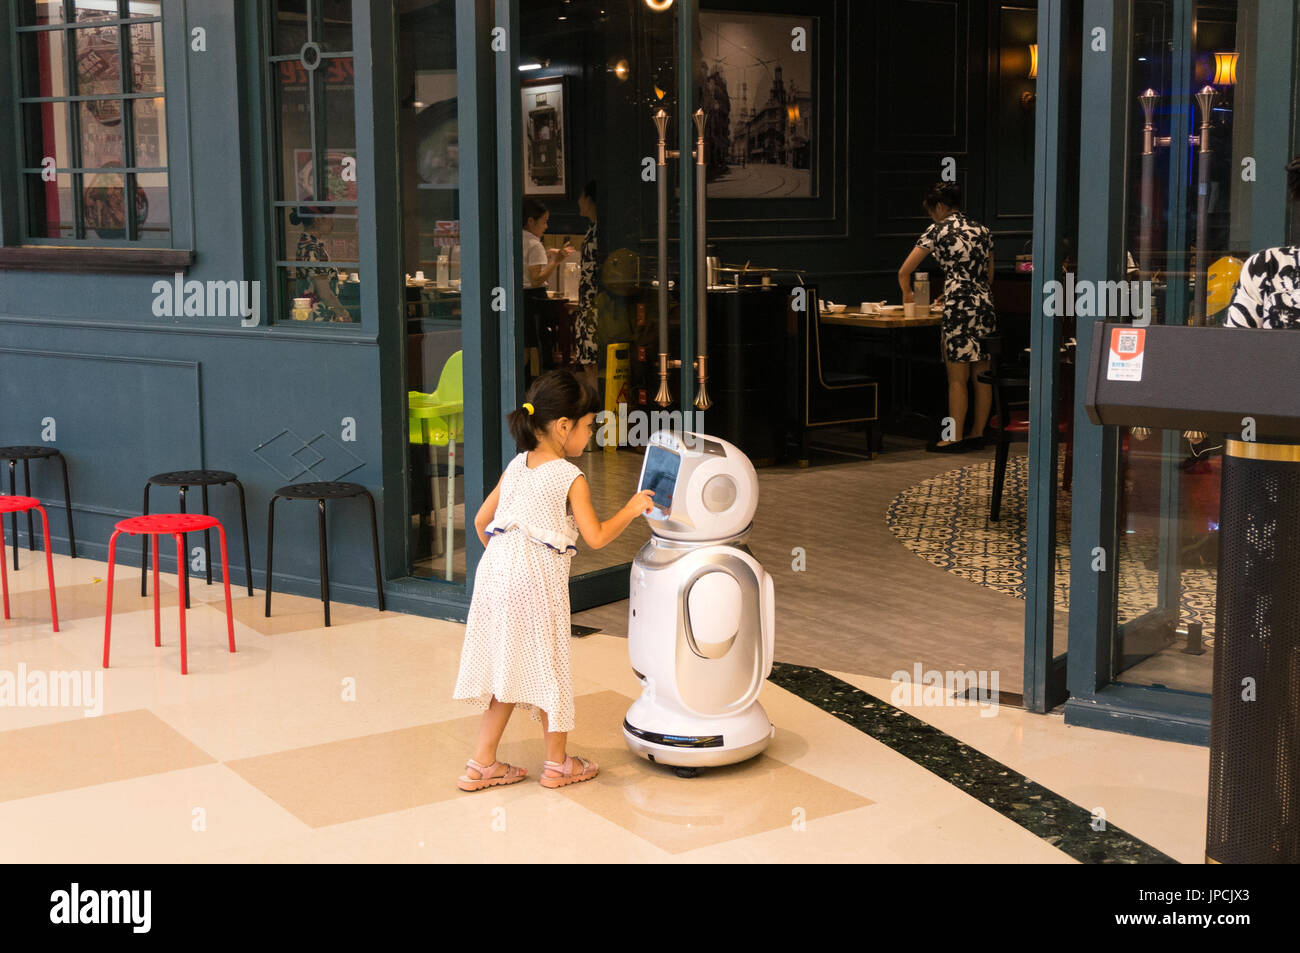 Young girl touching robot's face in front of restaurant in Shenzhen, China Stock Photo